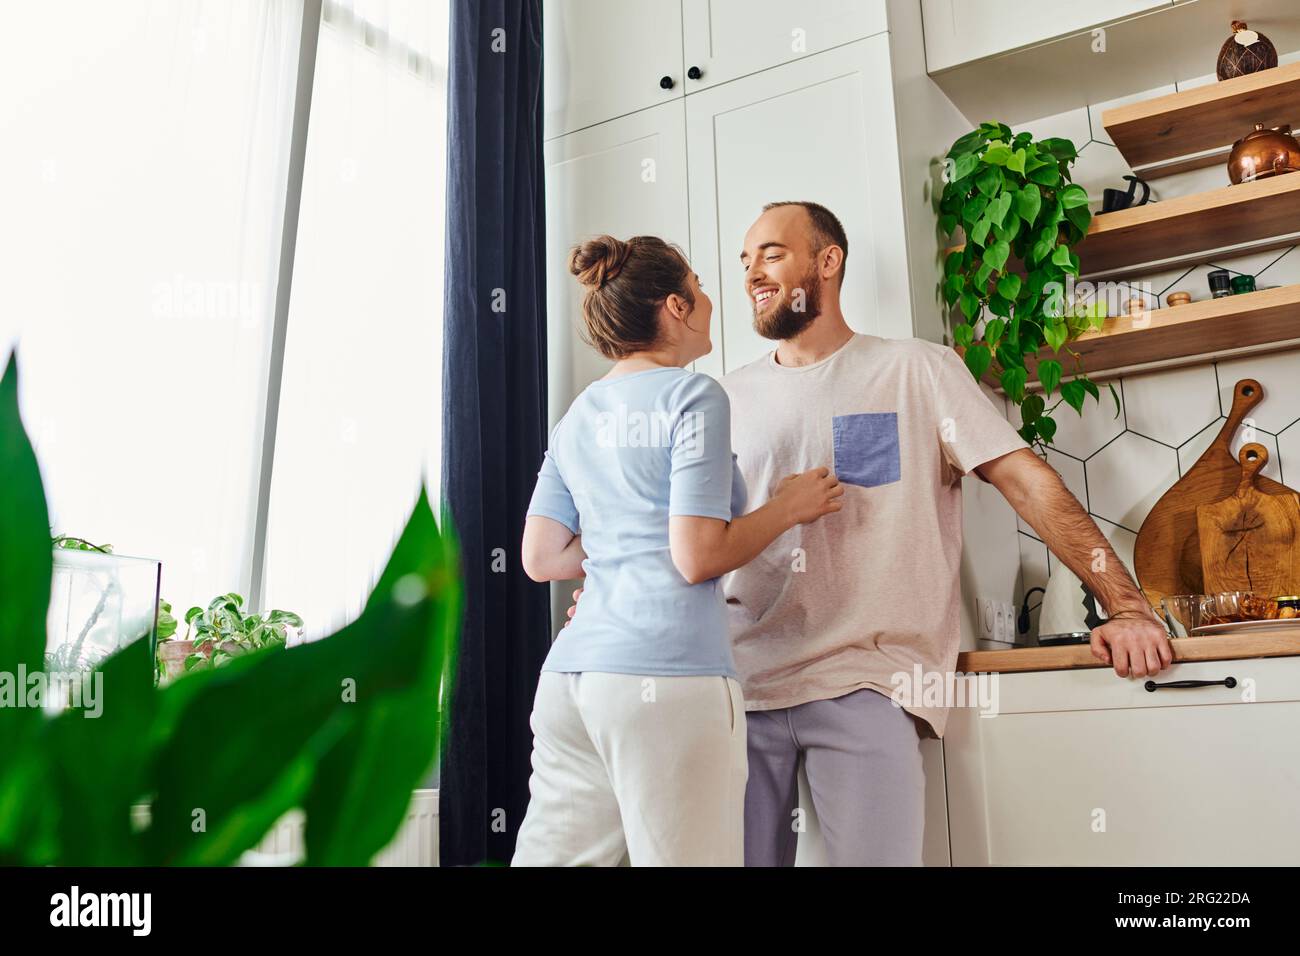 Smiling bearded man in homewear talking to girlfriend and standing together in kitchen at home Stock Photo